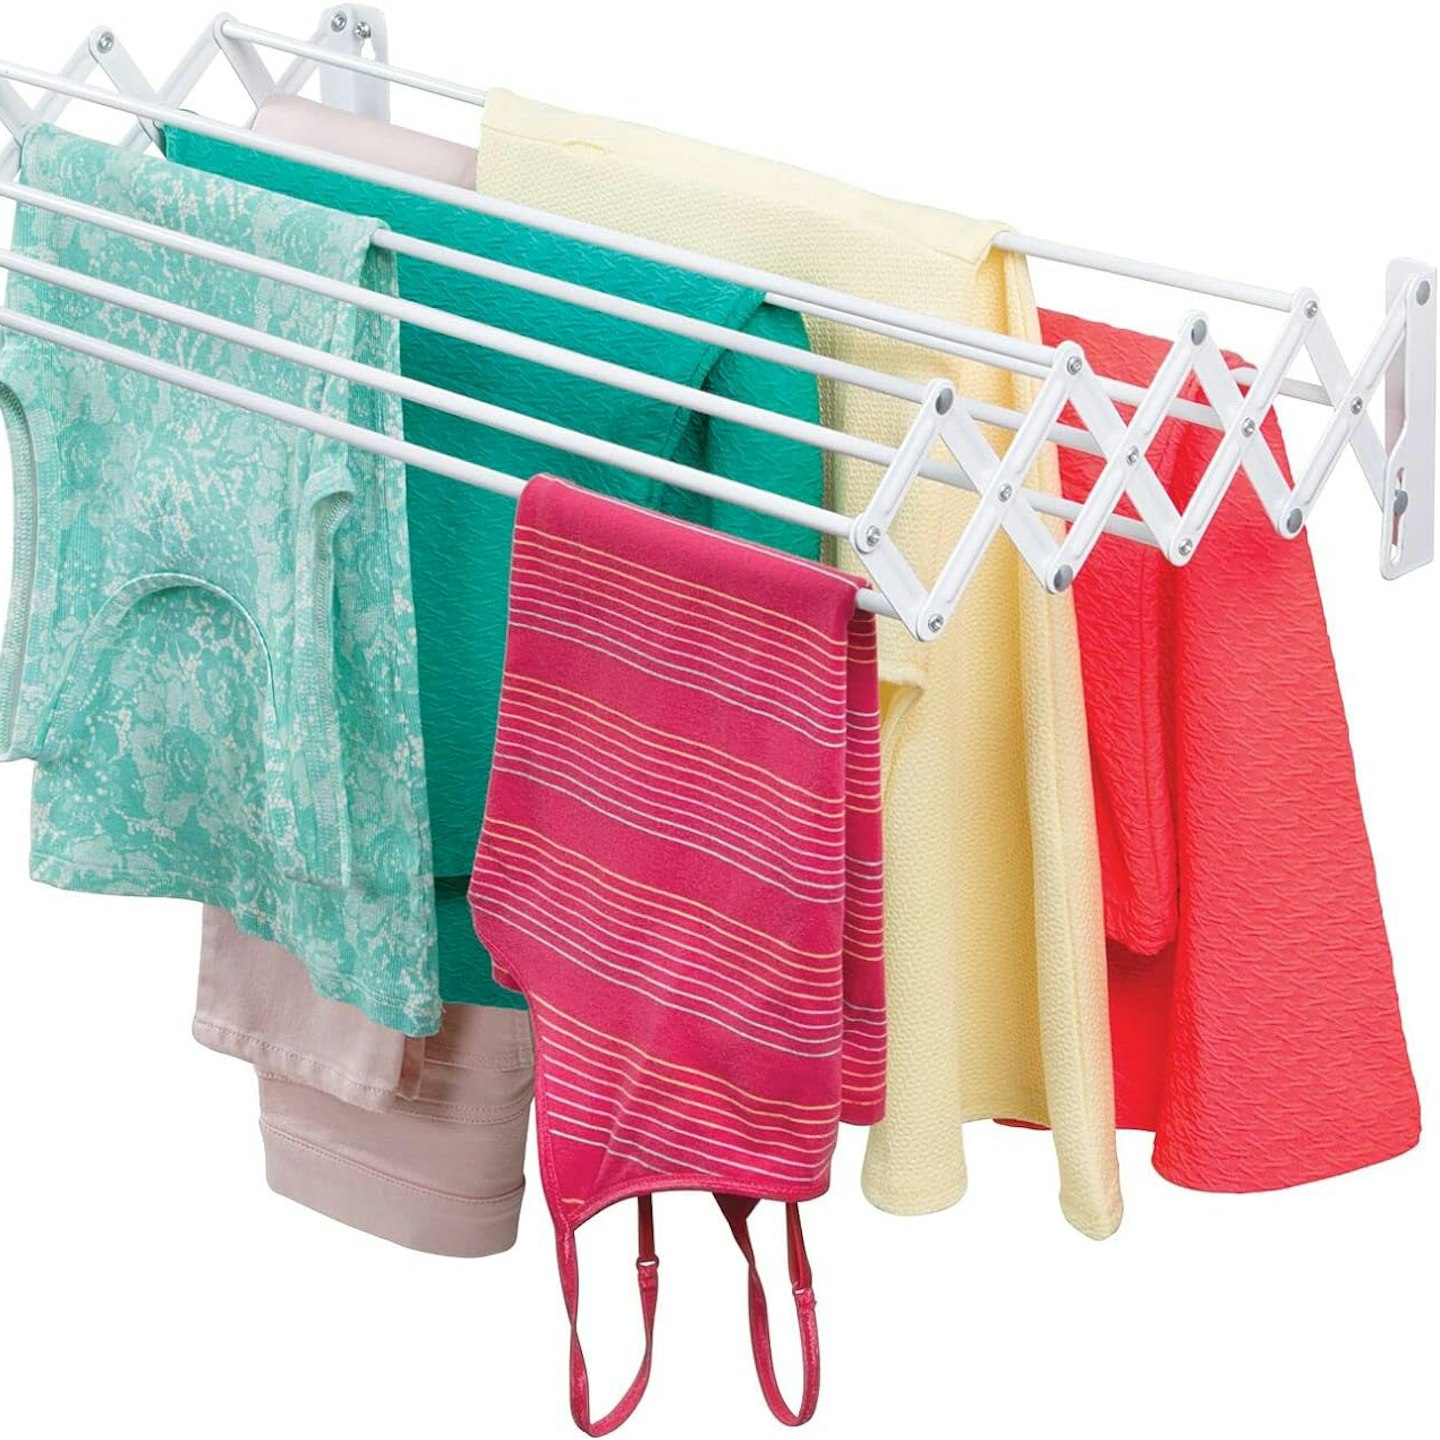 Retractable clothes airer in white